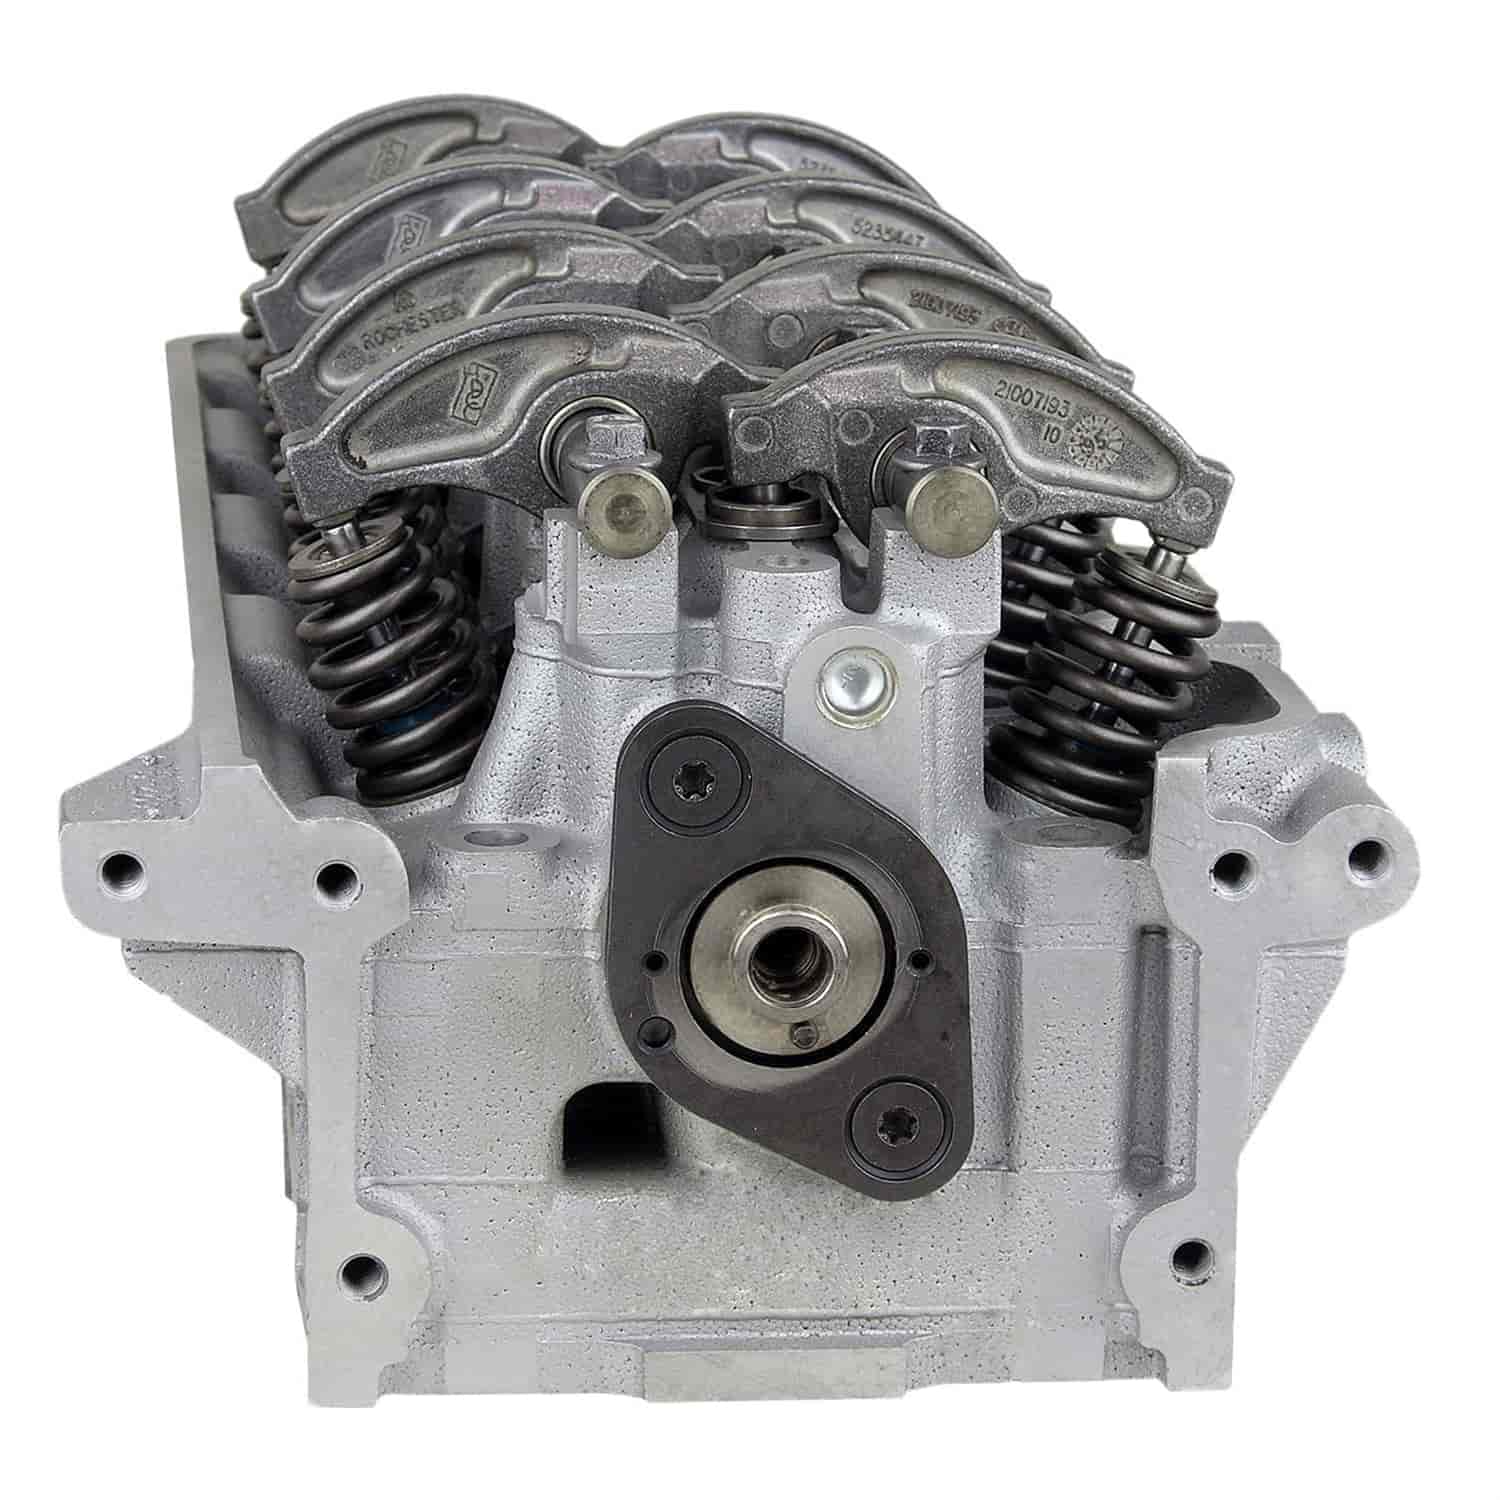 Remanufactured Cylinder Head for 1995-1999 Saturn with SOHC 1.9L L4